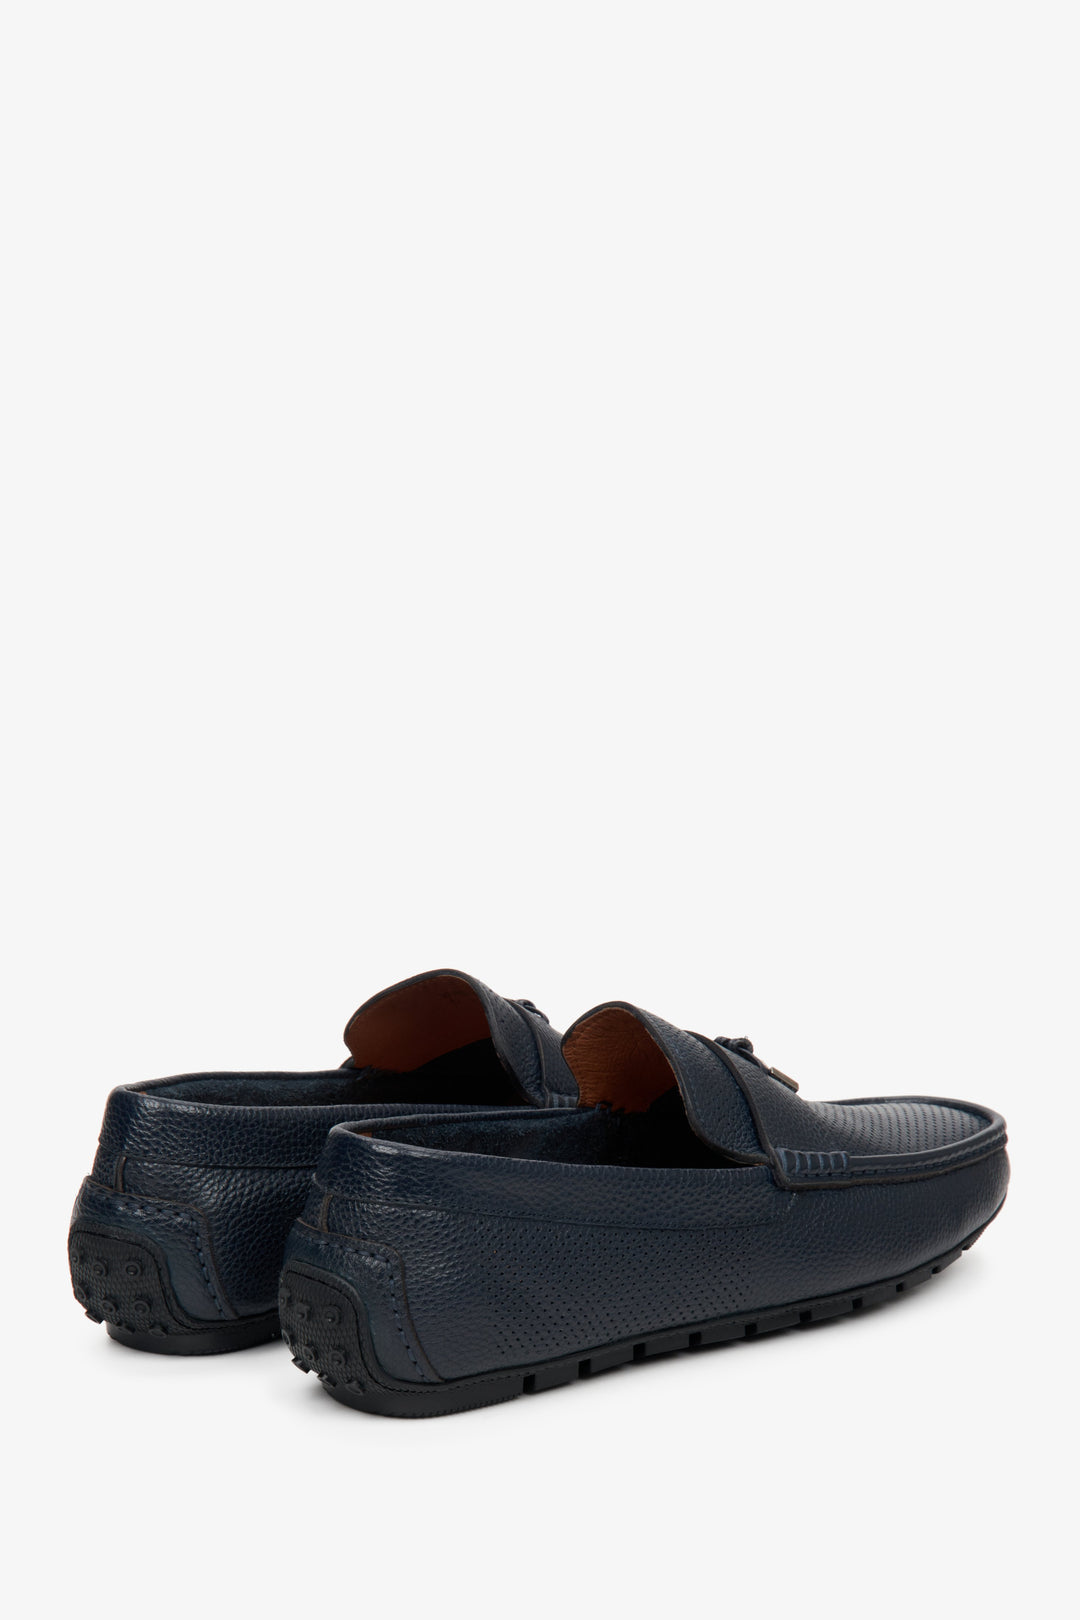 Navy blue leather men's loafers by Estro for fall - close-up on the heel and side seam of the shoes.